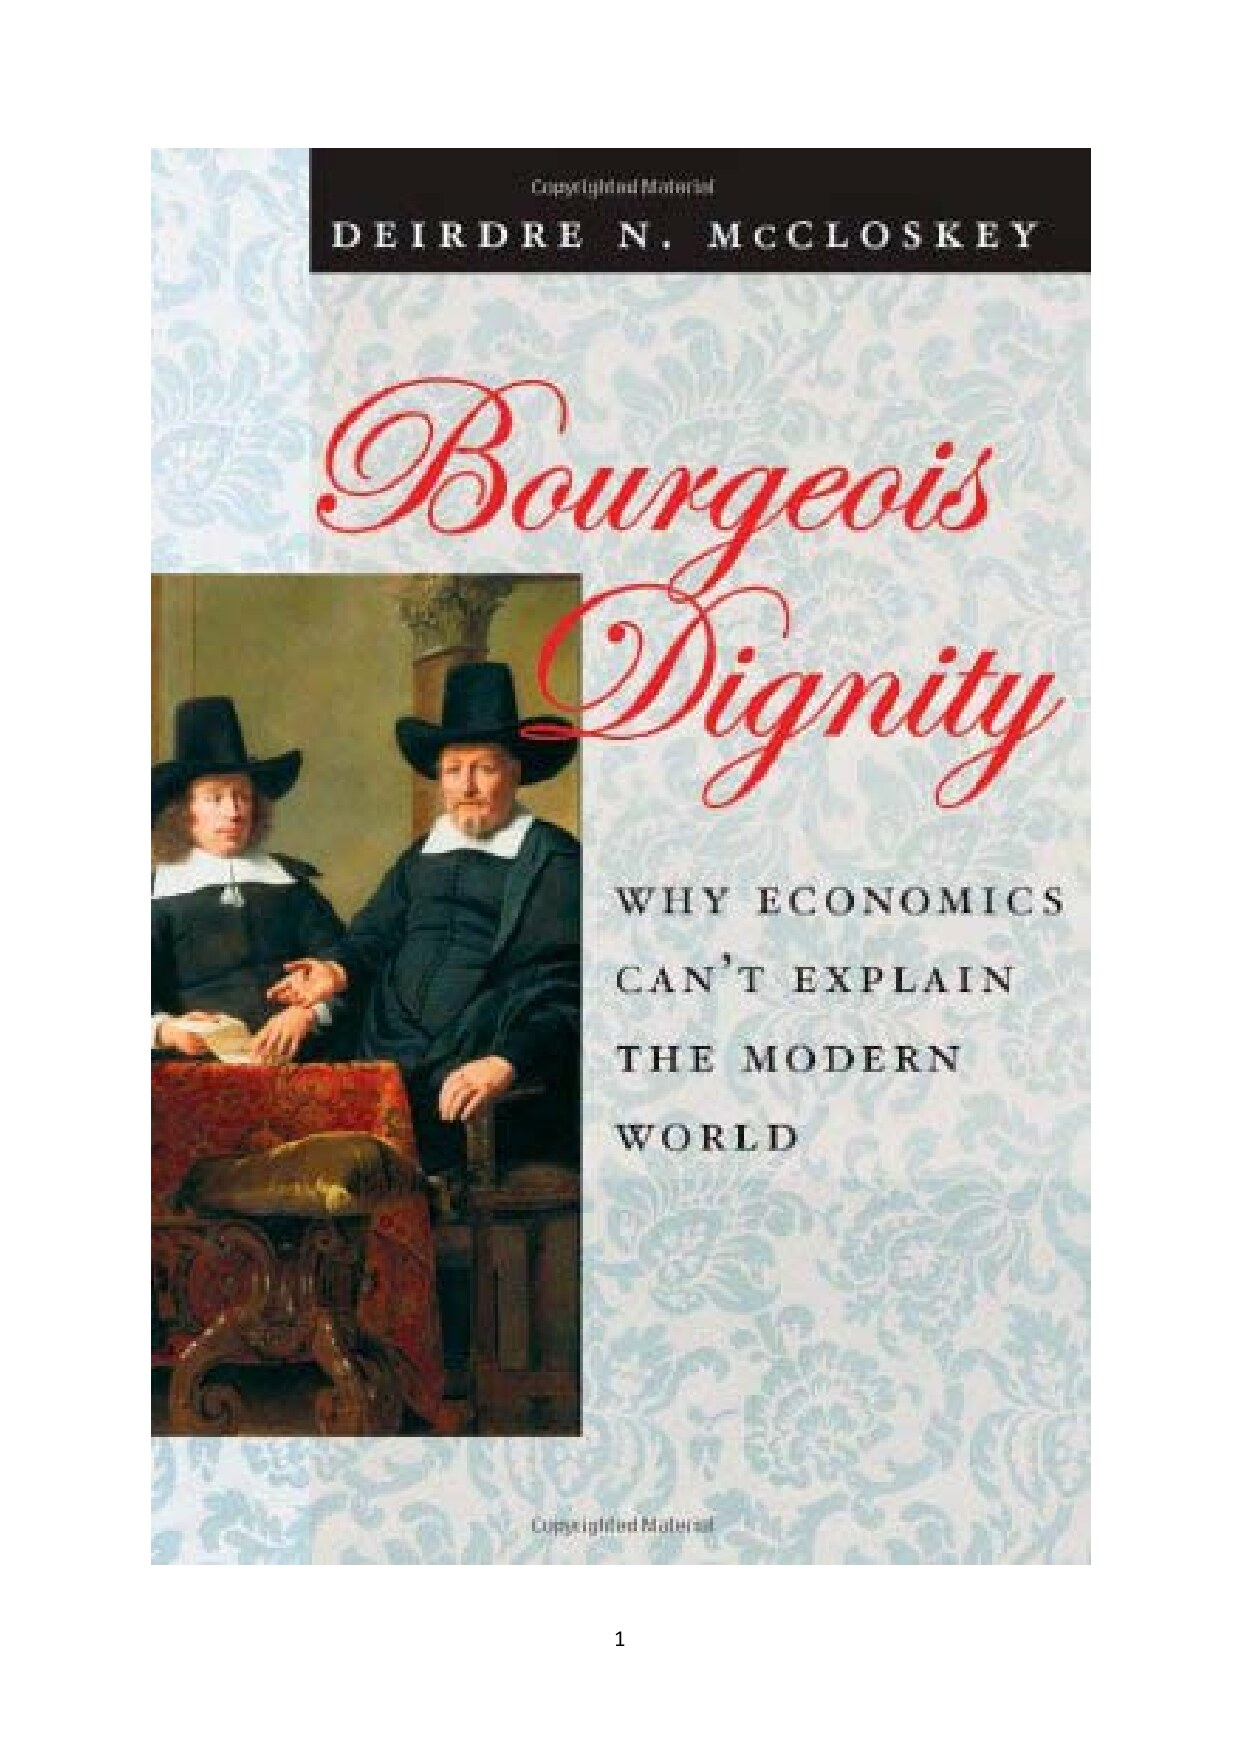 Deirdre N. McCloskey-Bourgeois Dignity_ Why Economics Can't Explain the Modern World-University Of Chicago Press (2010)